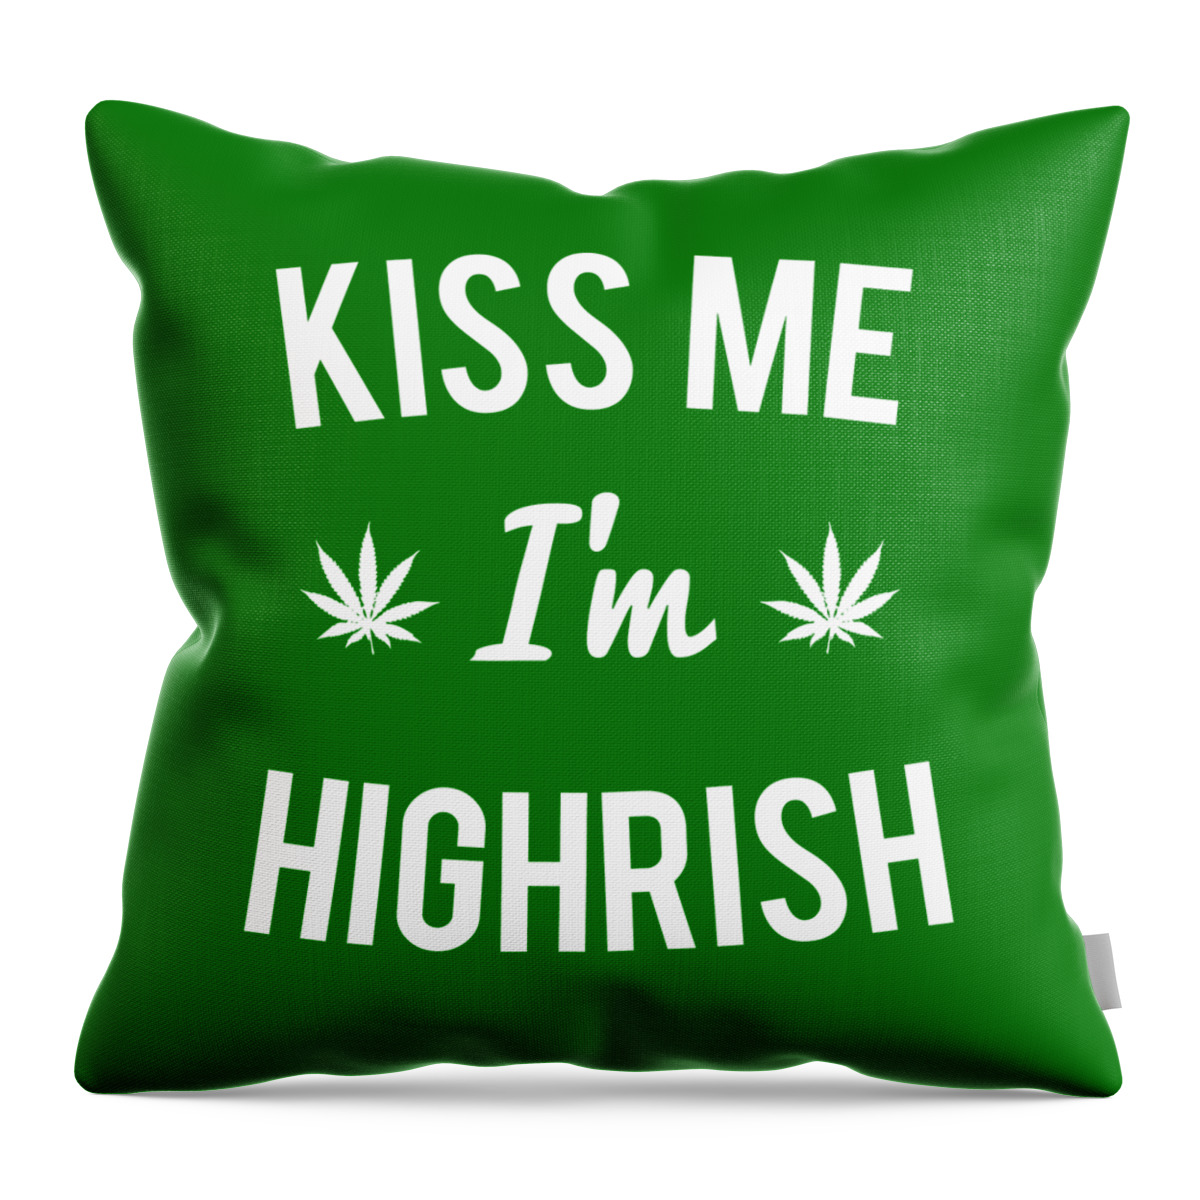 Cool Throw Pillow featuring the digital art Kiss Me Im Highrish Weed by Flippin Sweet Gear